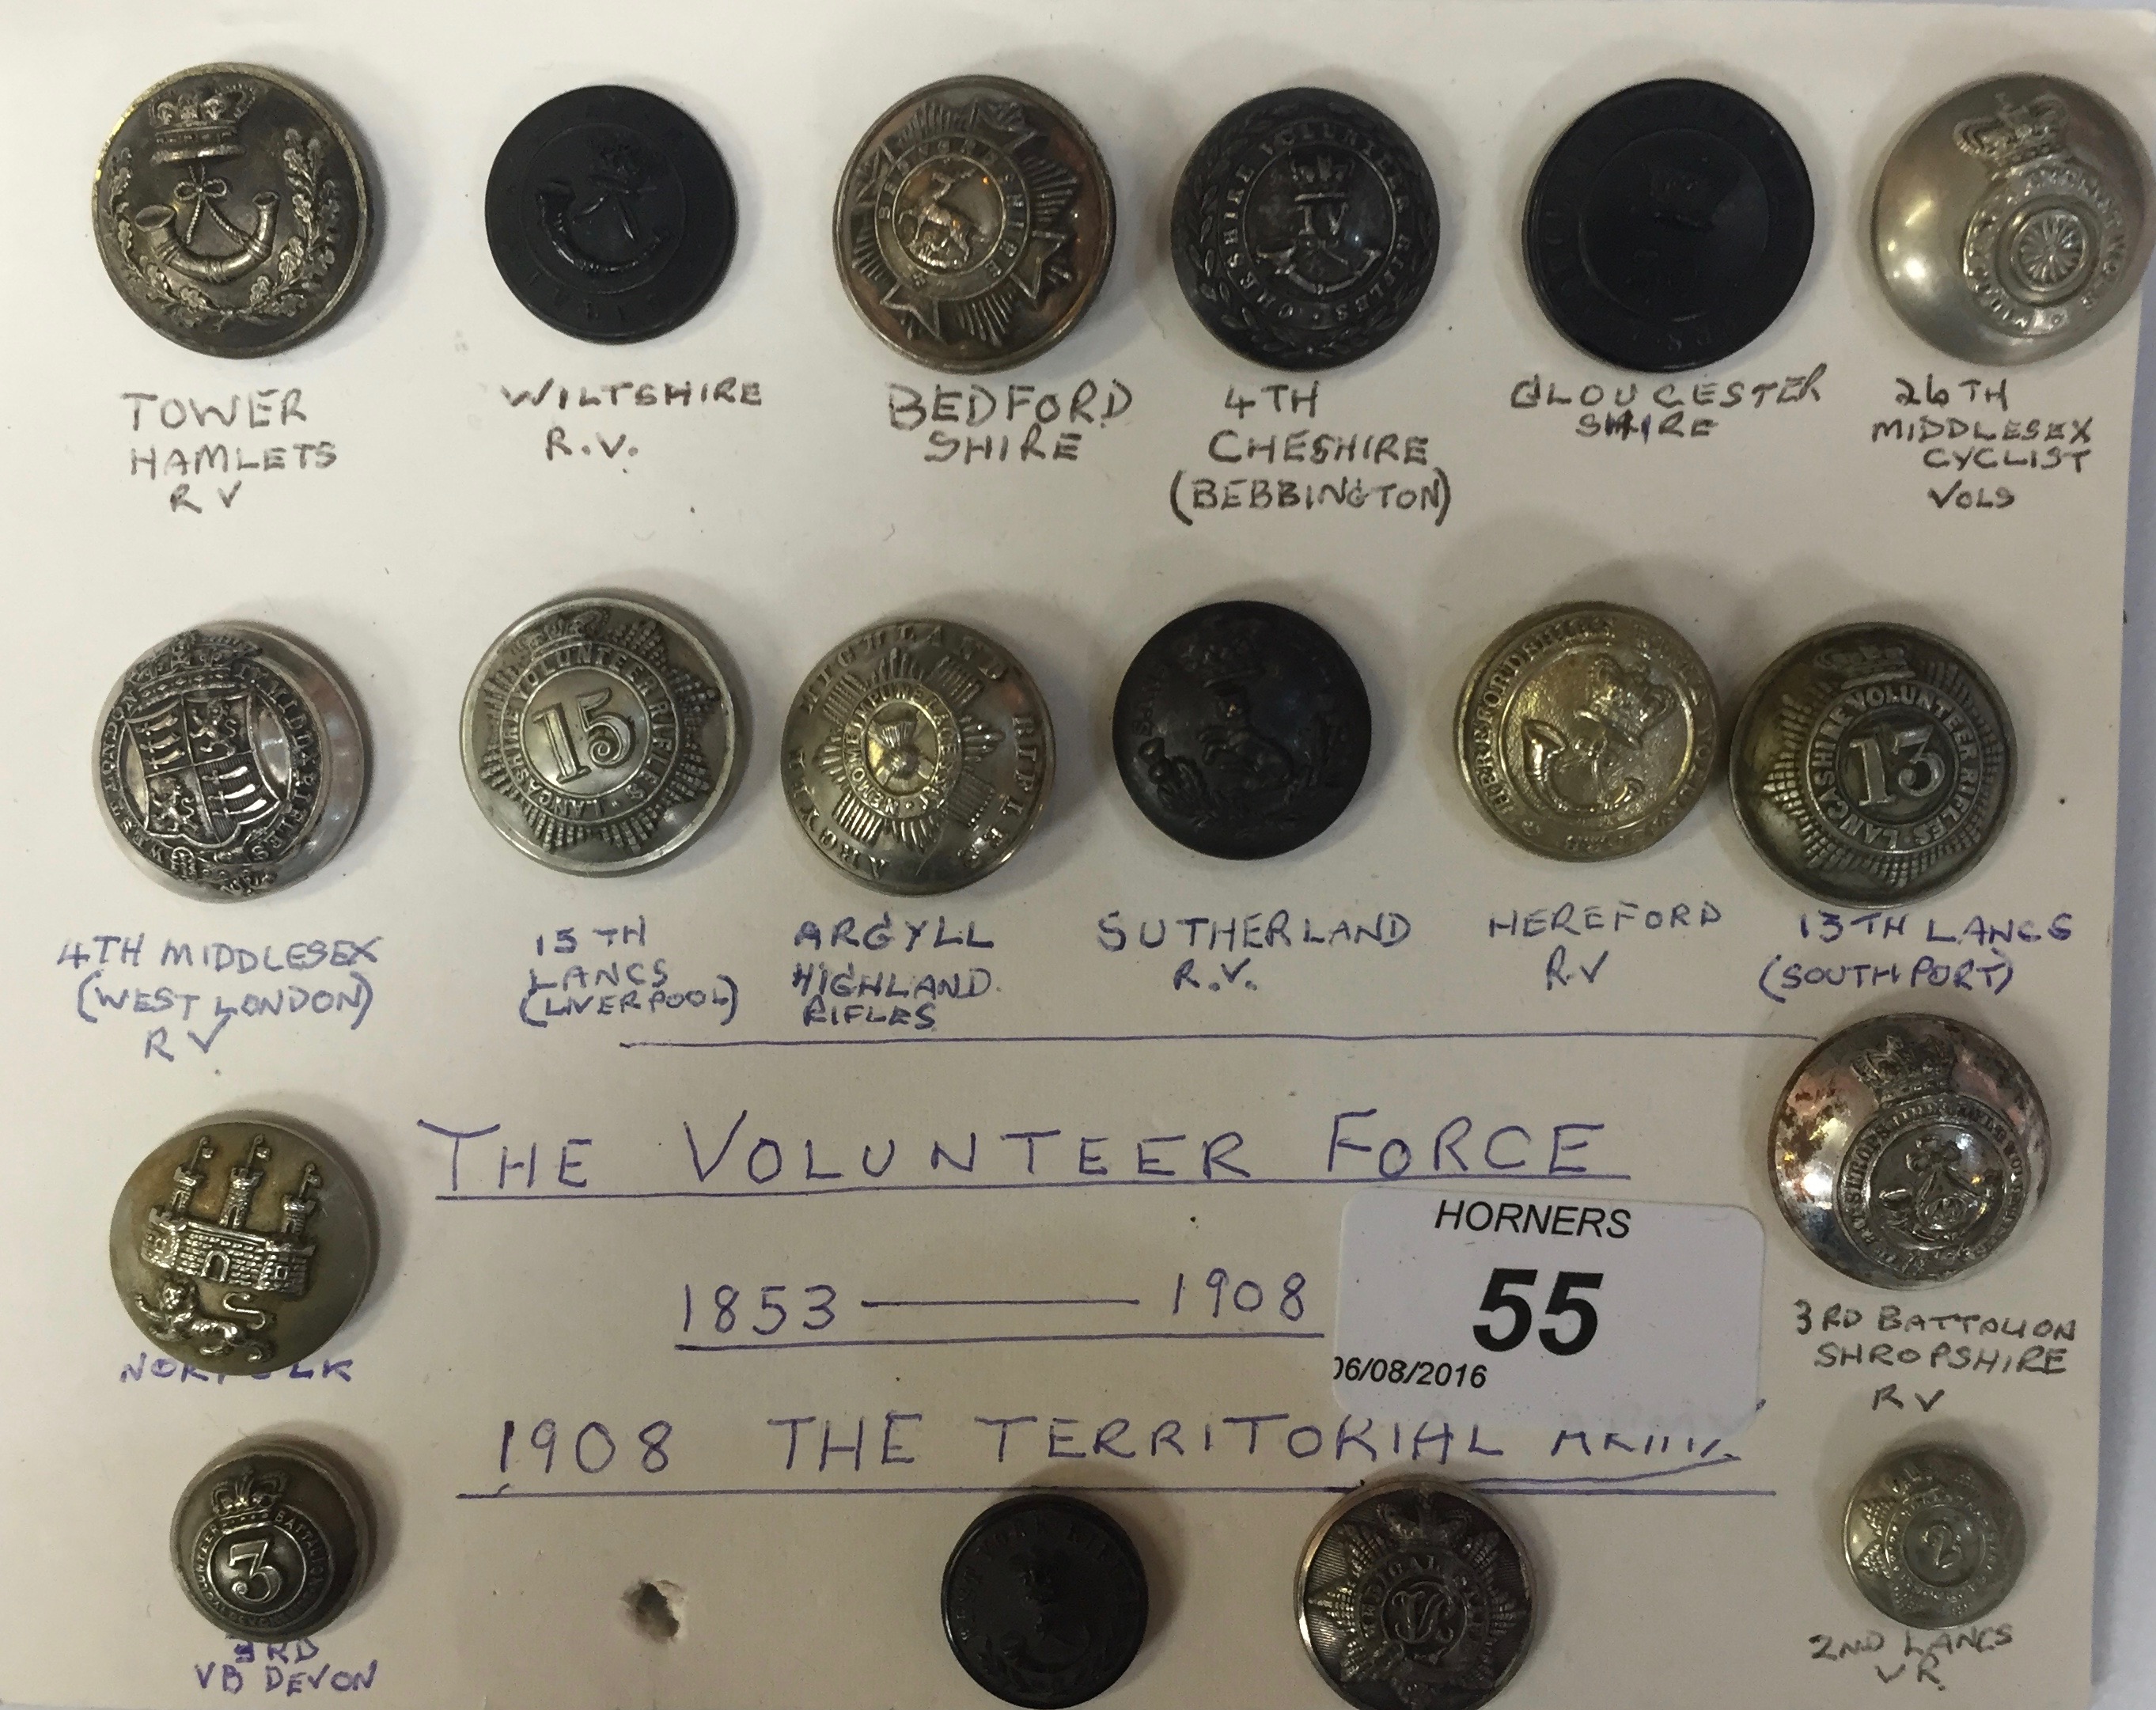 COLLECTION OF VOLUNTEERS FORCE BUTTONS 1853 - 1908